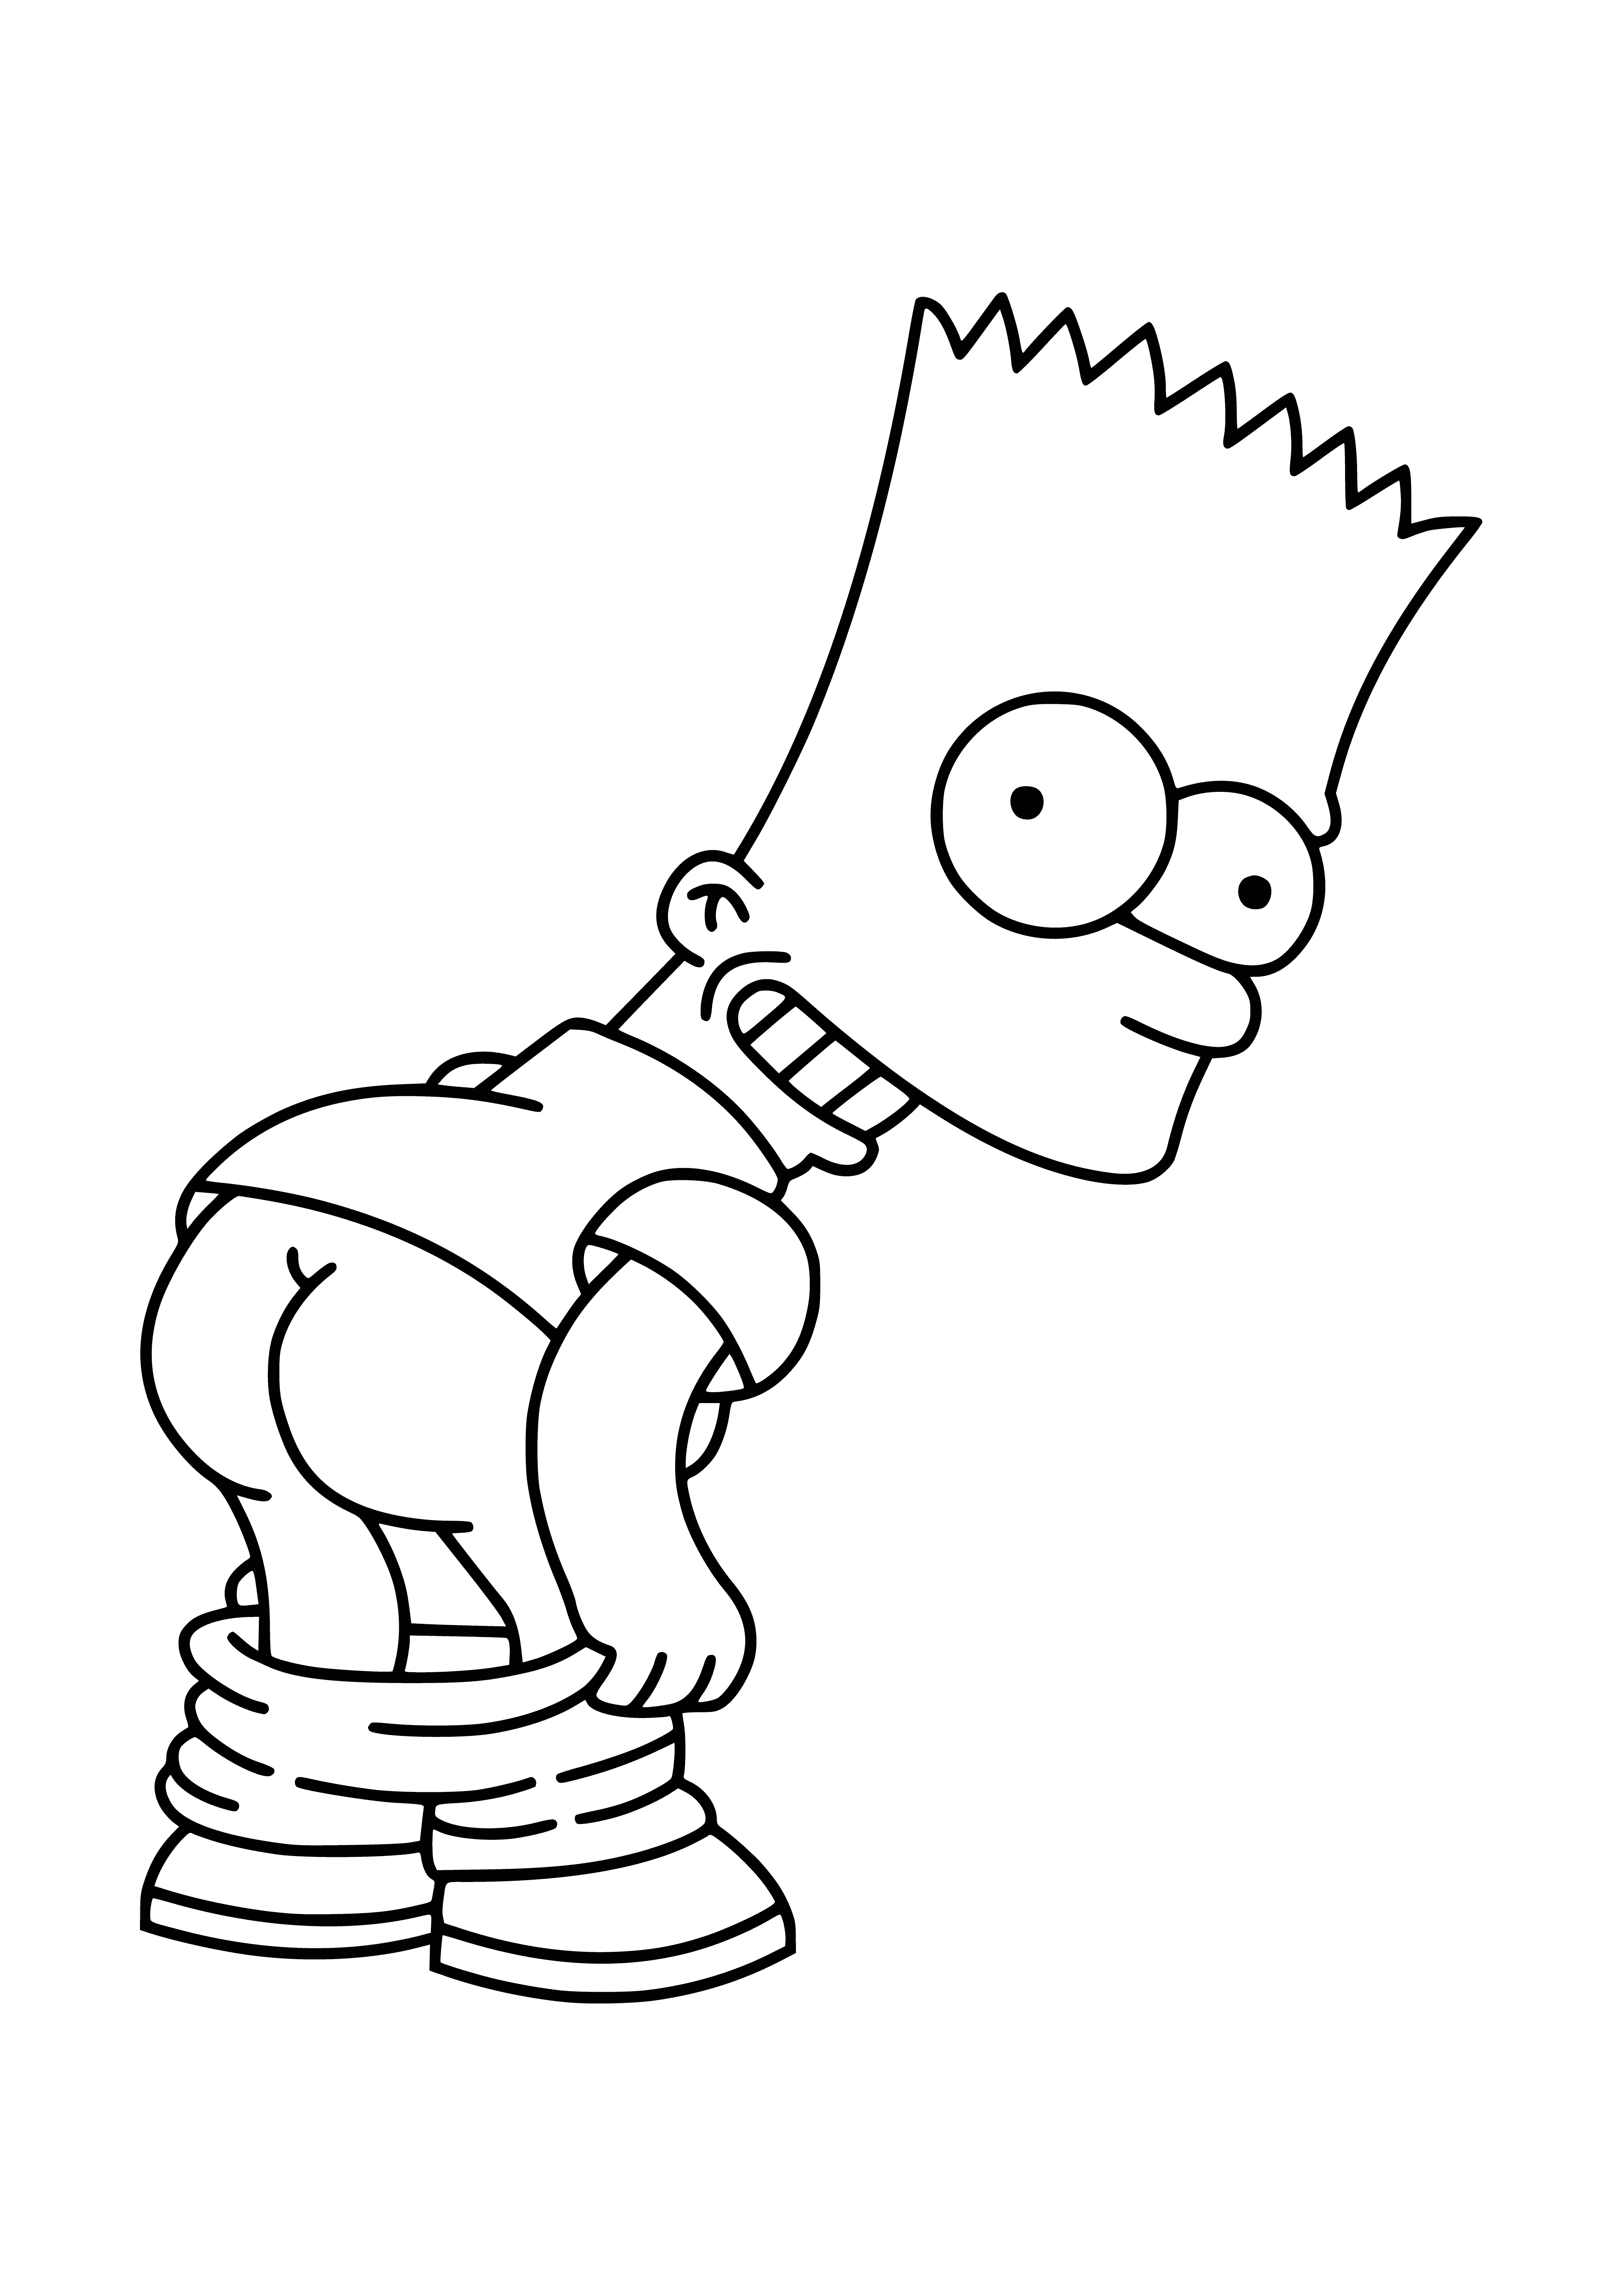 Bart is a hooligan coloring page